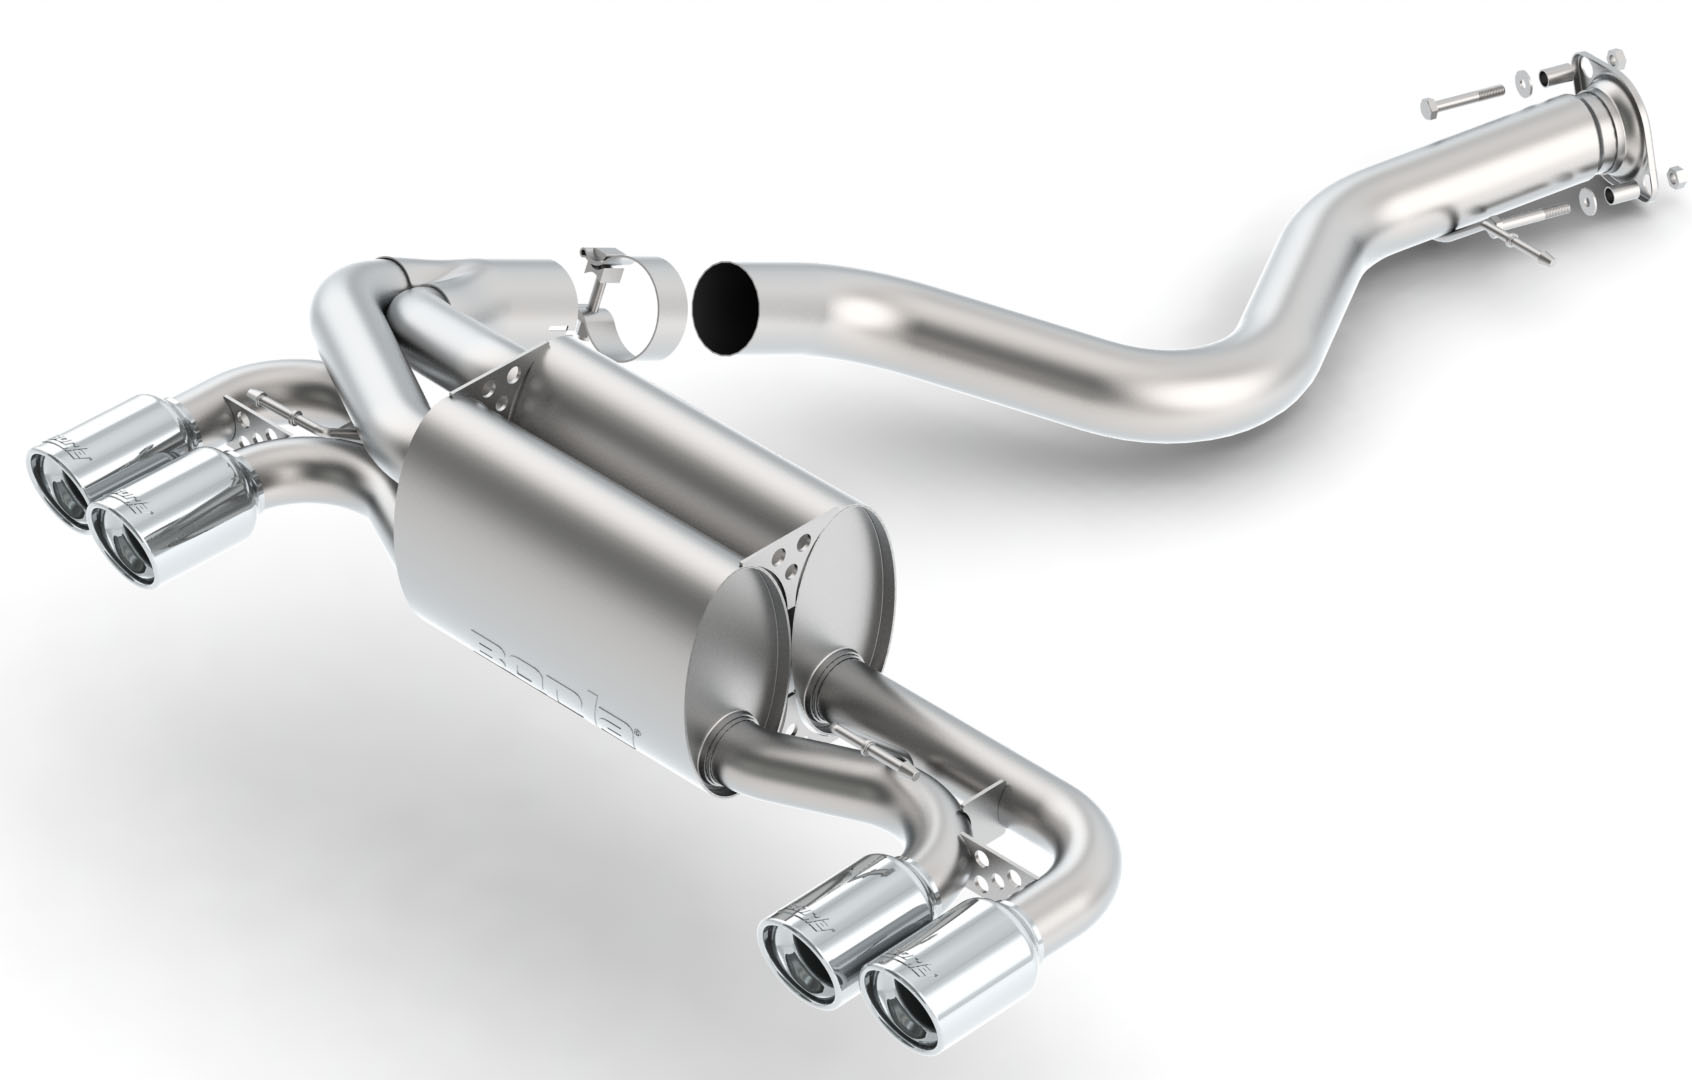 Application of Polishing Technology in Metal Components of Automotive Exhaust Systems